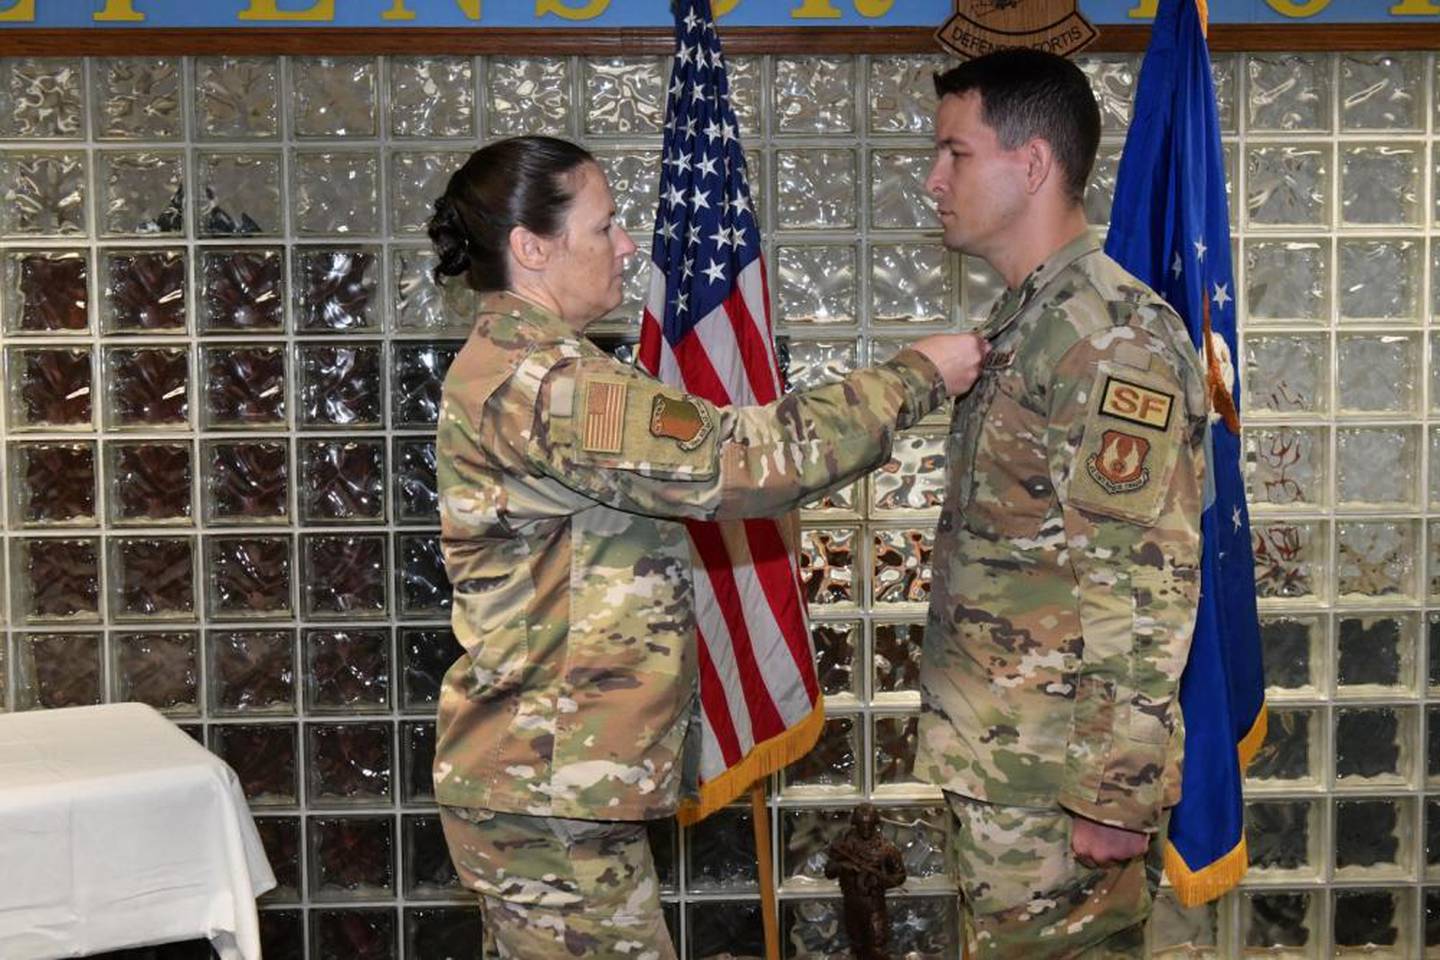 Col. Lindsay Droz, 78th Air Base Wing commander, left, decorates Master Sgt. Mathue B. Snow, 78th Security Forces Squadron, with the Bronze Star at Robins Air Force Base, Georgia, Sept. 9, 2022. Snow was decorated for actions during the Jan. 5, 2020, attack on Manda Bay, Kenya, where one American soldier and two Department of Defense civilian contractors died, and six U.S. aircraft and one Kenyan aircraft were destroyed. (Rodney Speed/Air Force)